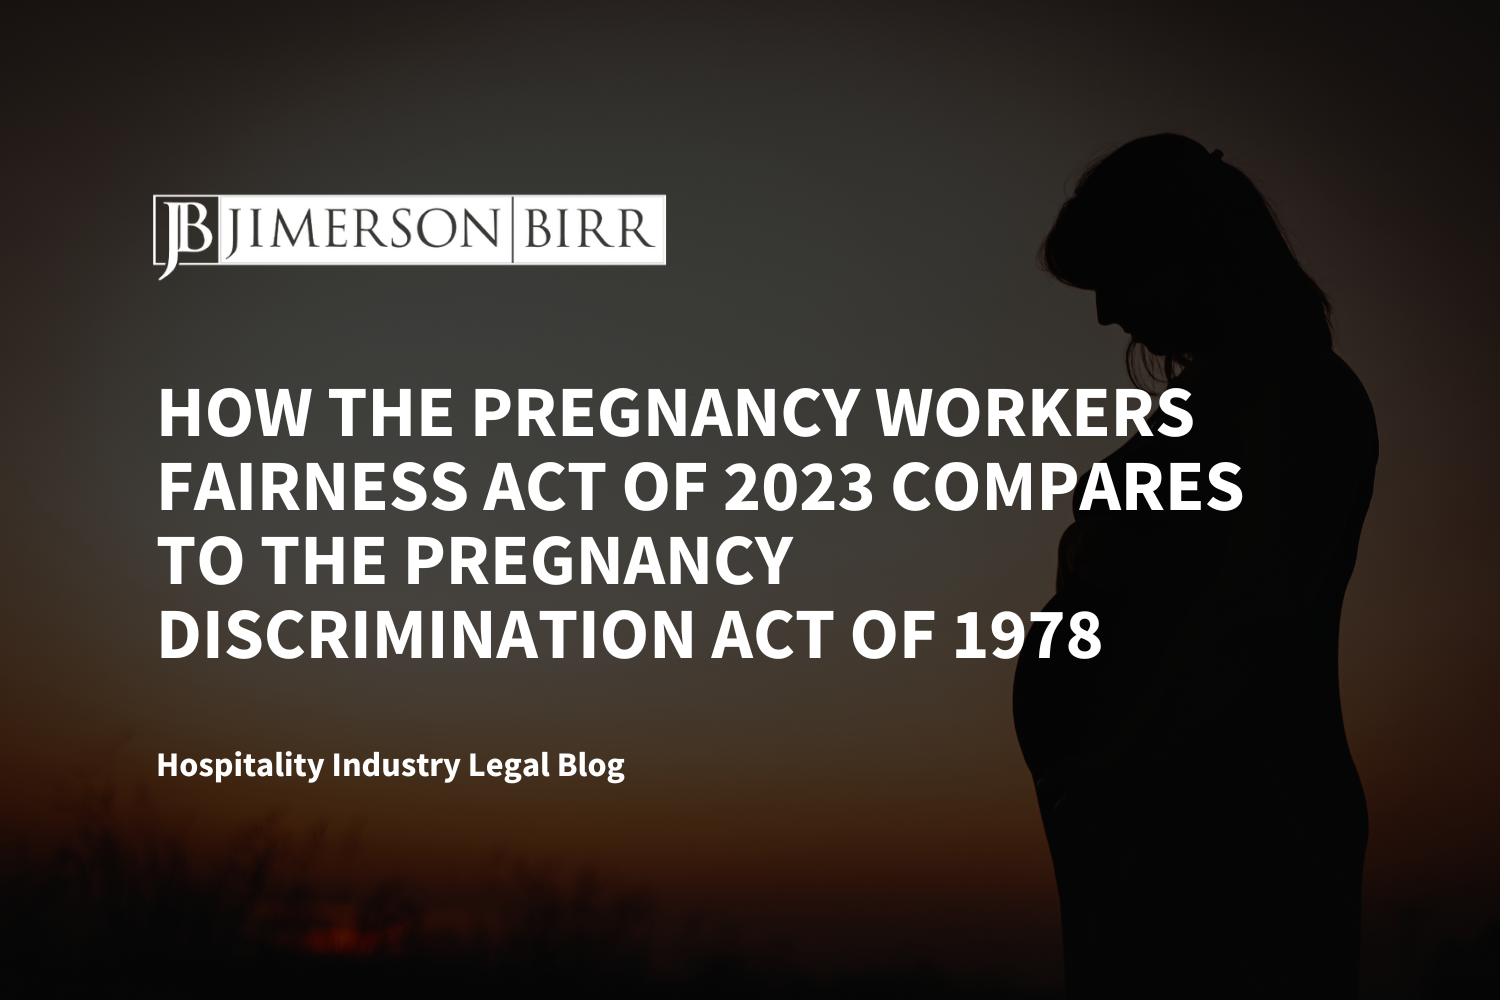 How the Pregnancy Workers Fairness Act of 2023 Compares to the Pregnancy Discrimination Act of 1978